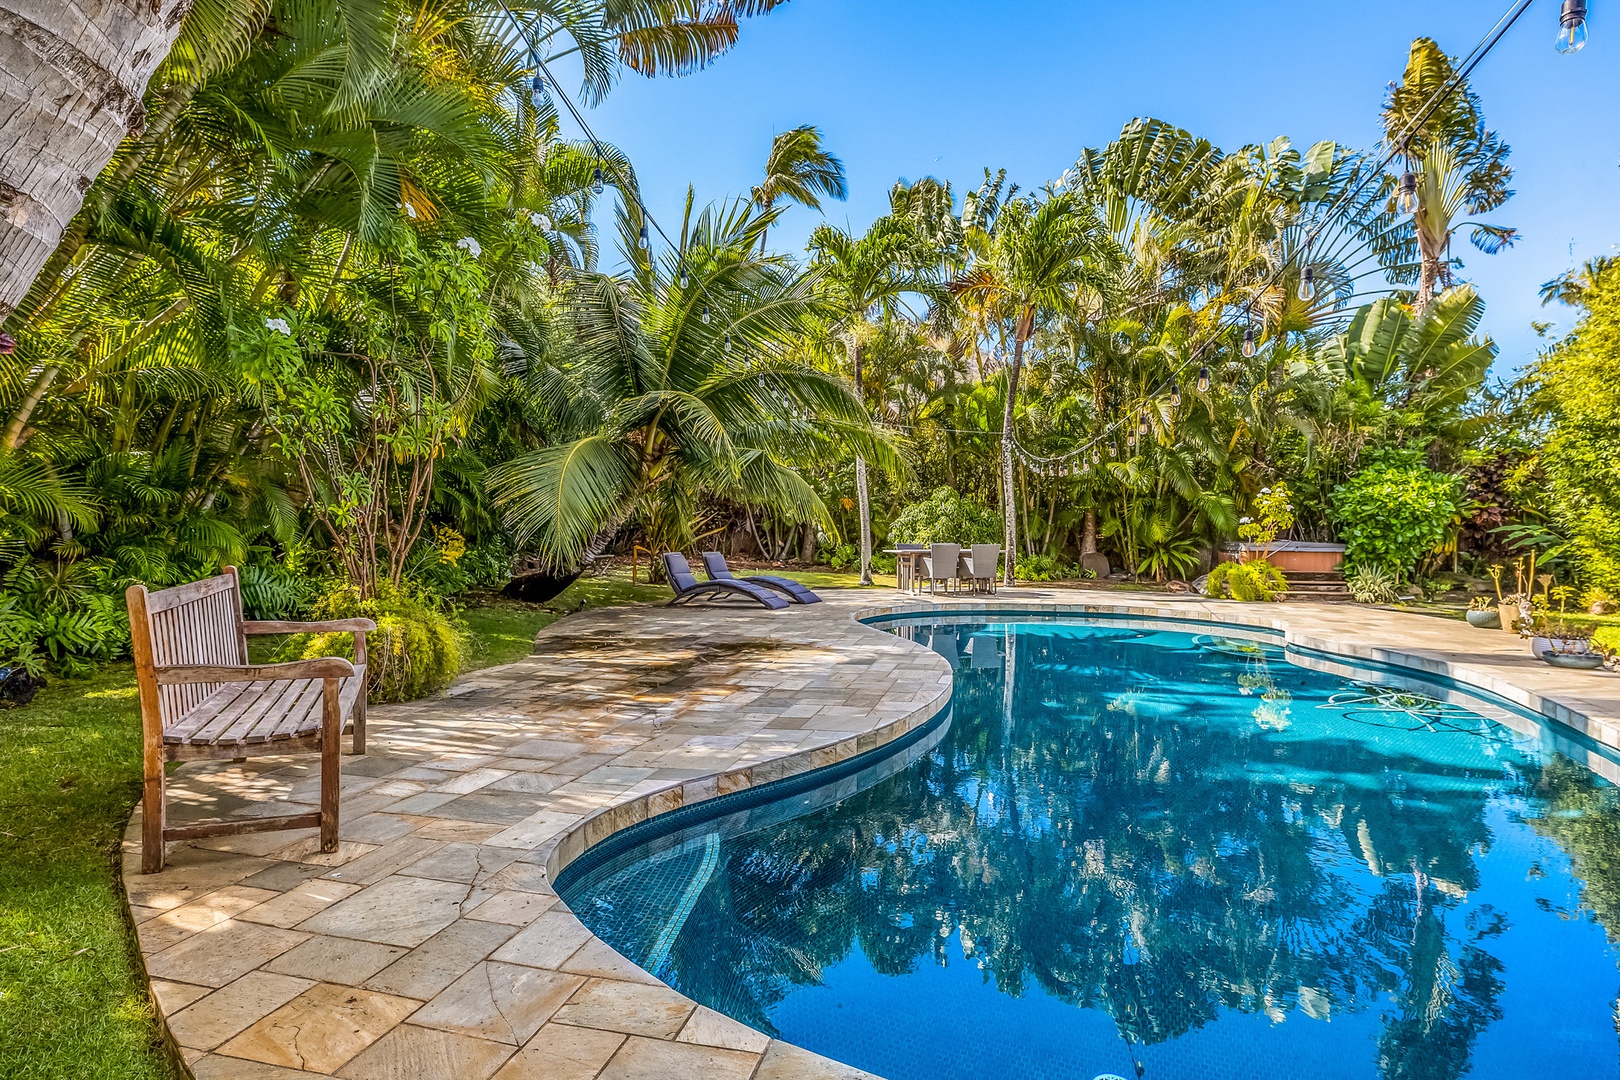 Honolulu Vacation Rentals, Hale Ho'omaha - Soak up the sun poolside or jump in to cool off